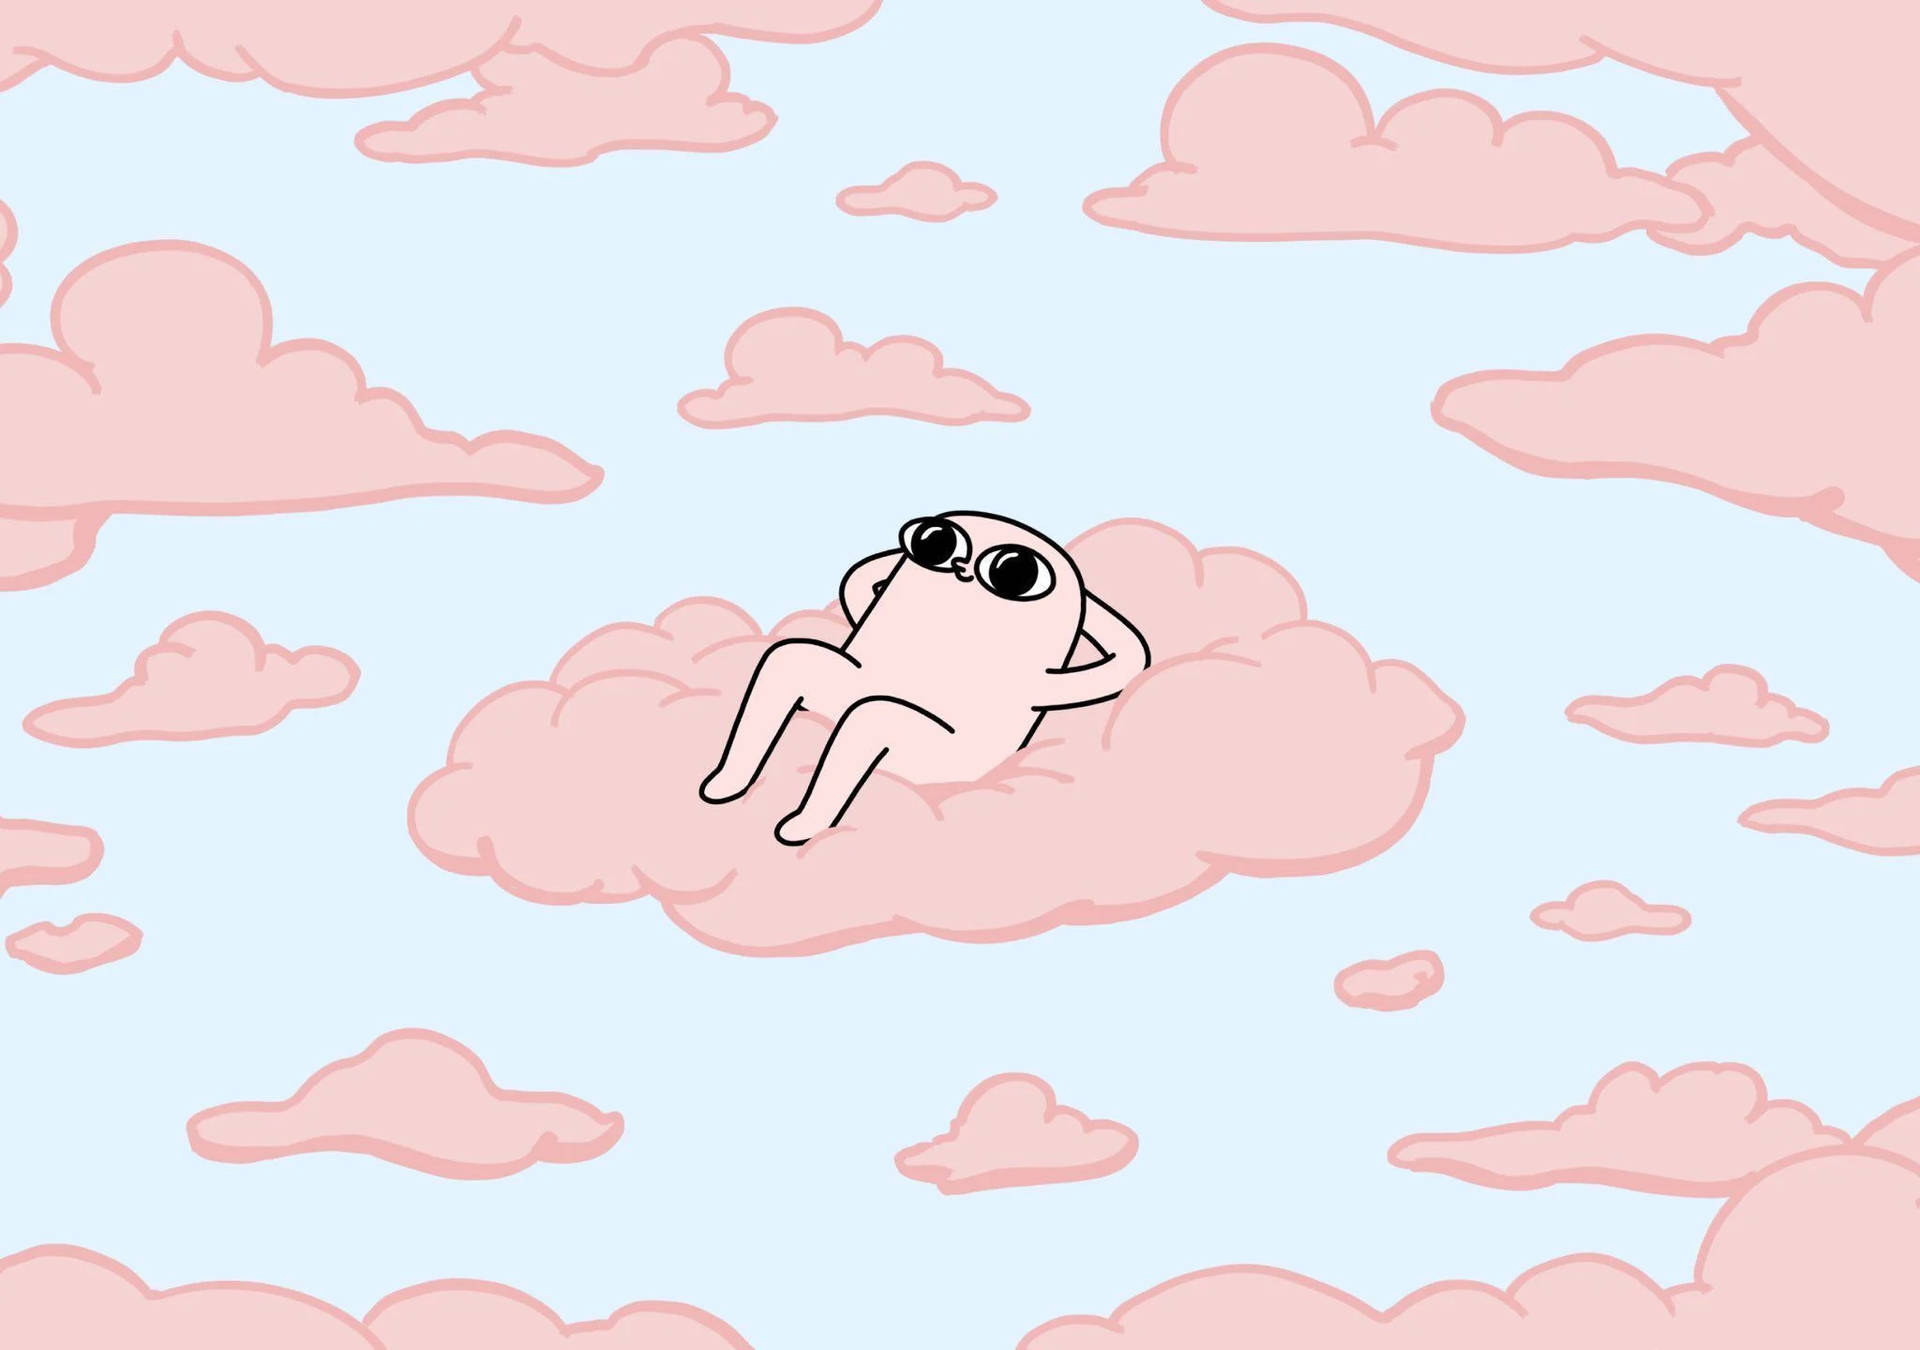 Aesthetic Cartoon Chilling Ketnipz Character In Sky Background